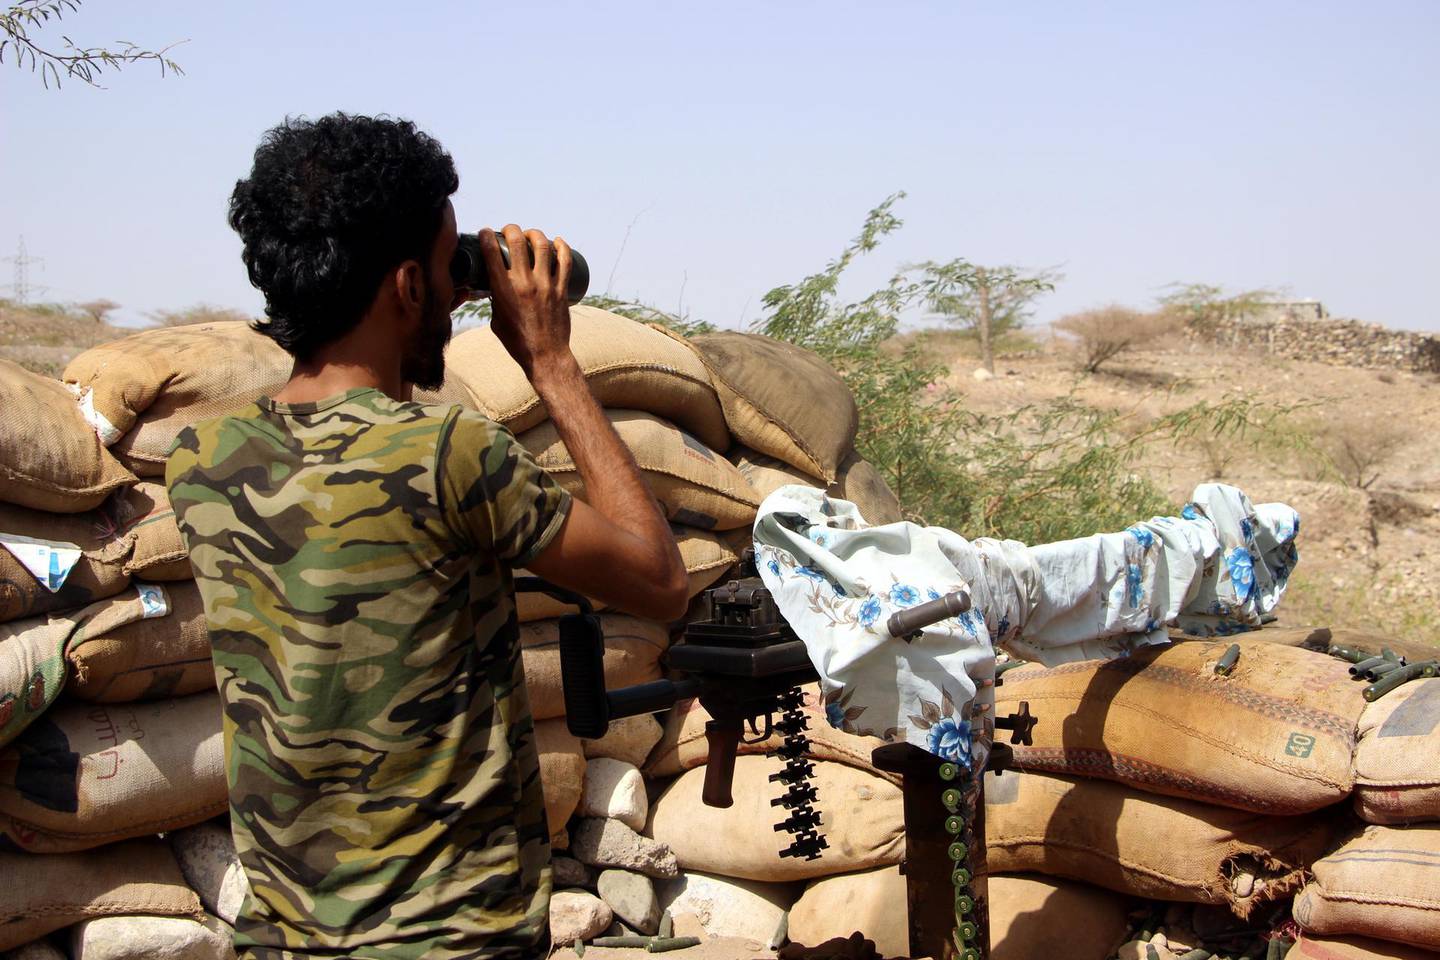 epa07322544 A member of Yemeni pro-government forces uses a binoculars as he patrols at a position during a fragile ceasefire in the port city of Hodeidah, Yemen, 26 January 2019. According to reports, the United Nations is set to replace the chief of a UN monitoring mission General Patrick Cammaert with Danish Major General Michael Anker Lollesgaard to oversee boosting the monitoring mission to up to 75 observers in the Yemeni port city of Hodeidah.  EPA/NAJEEB ALMAHBOOBI